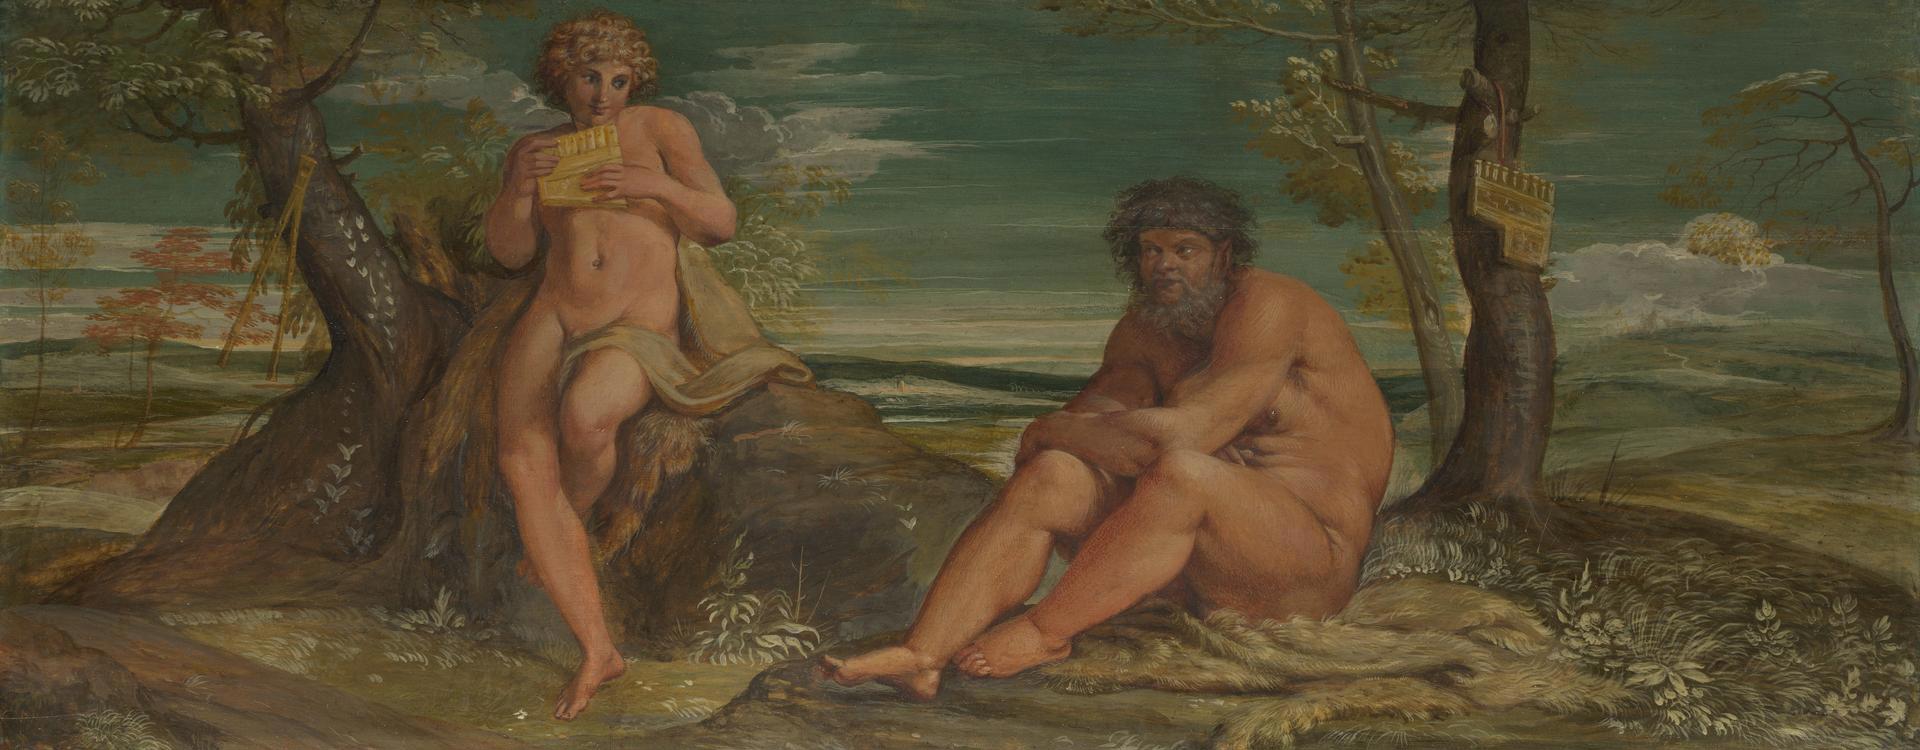 Marsyas and Olympus by Annibale Carracci